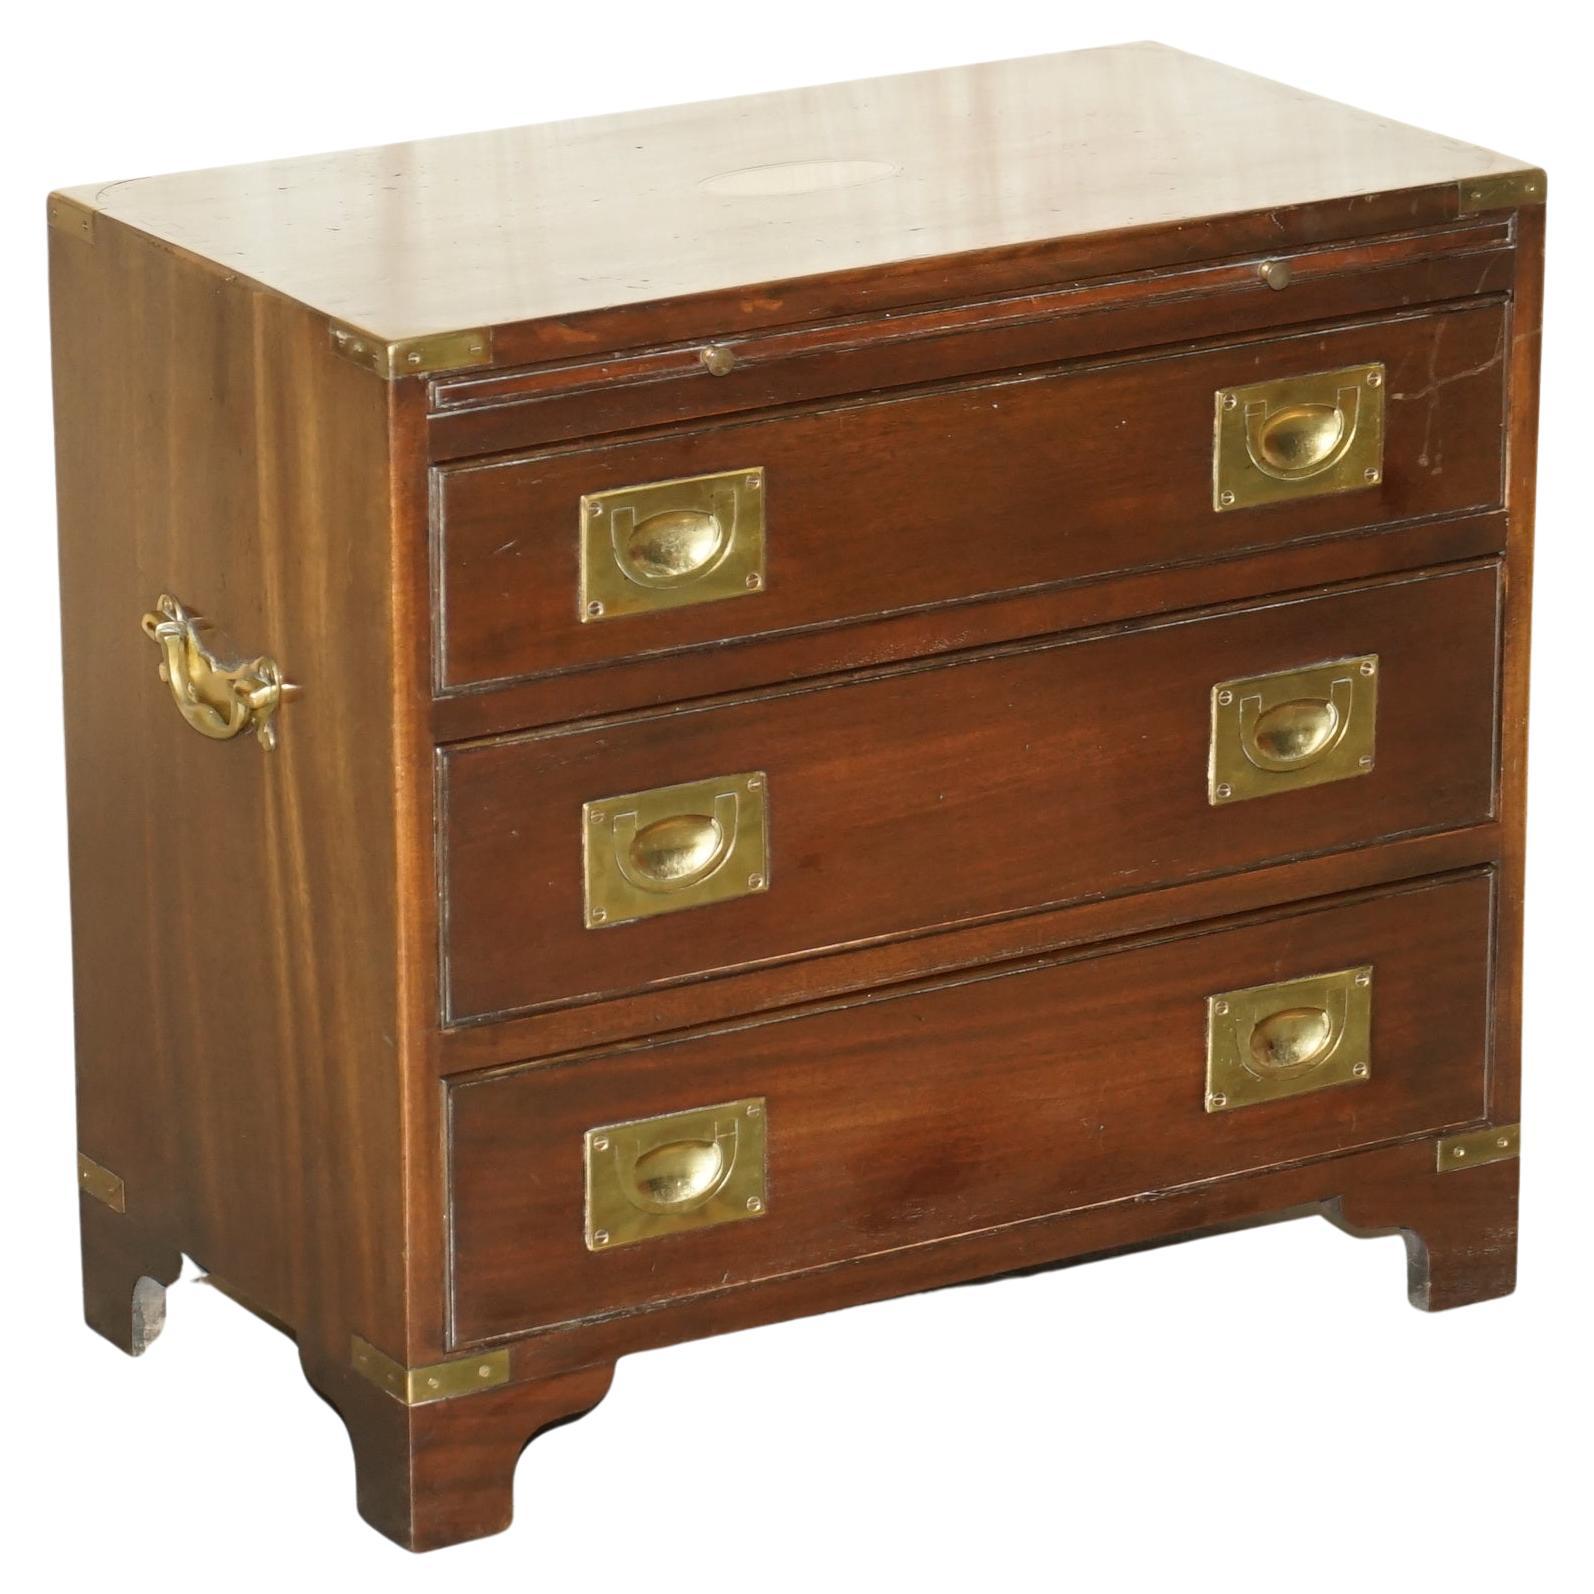 Harrods Kennedy Military Campaign Butlers Serving Chest of Drawers Side Table